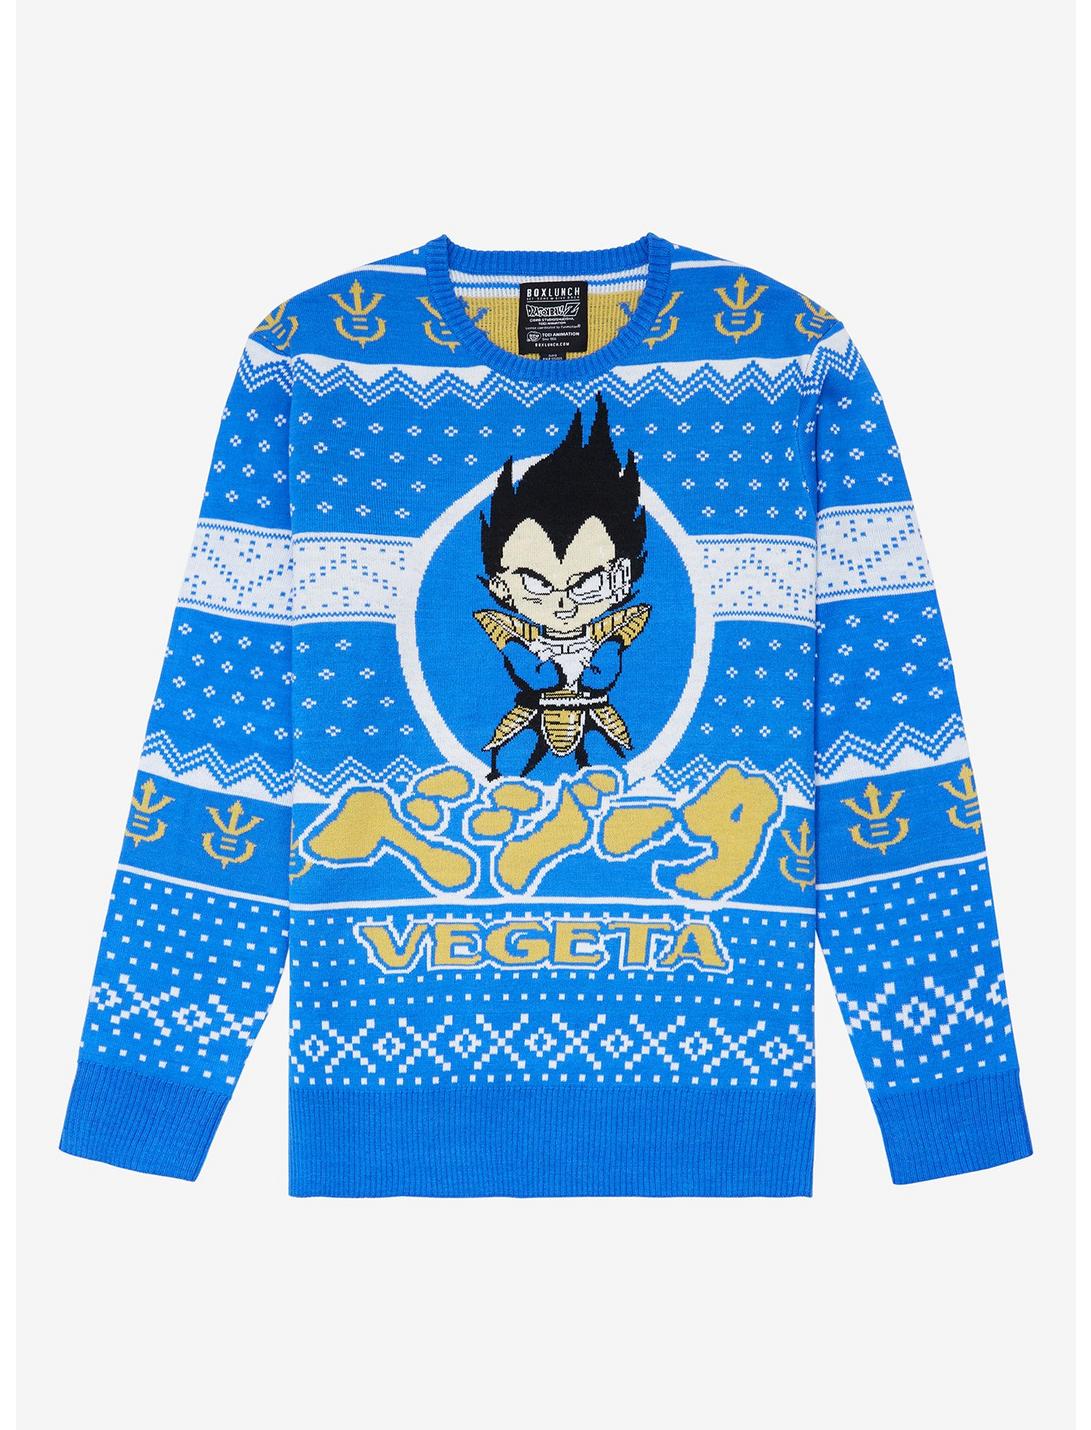 Dragon Ball Z Vegeta Holiday Sweater - BoxLunch Exclusive, MULTI, hi-res